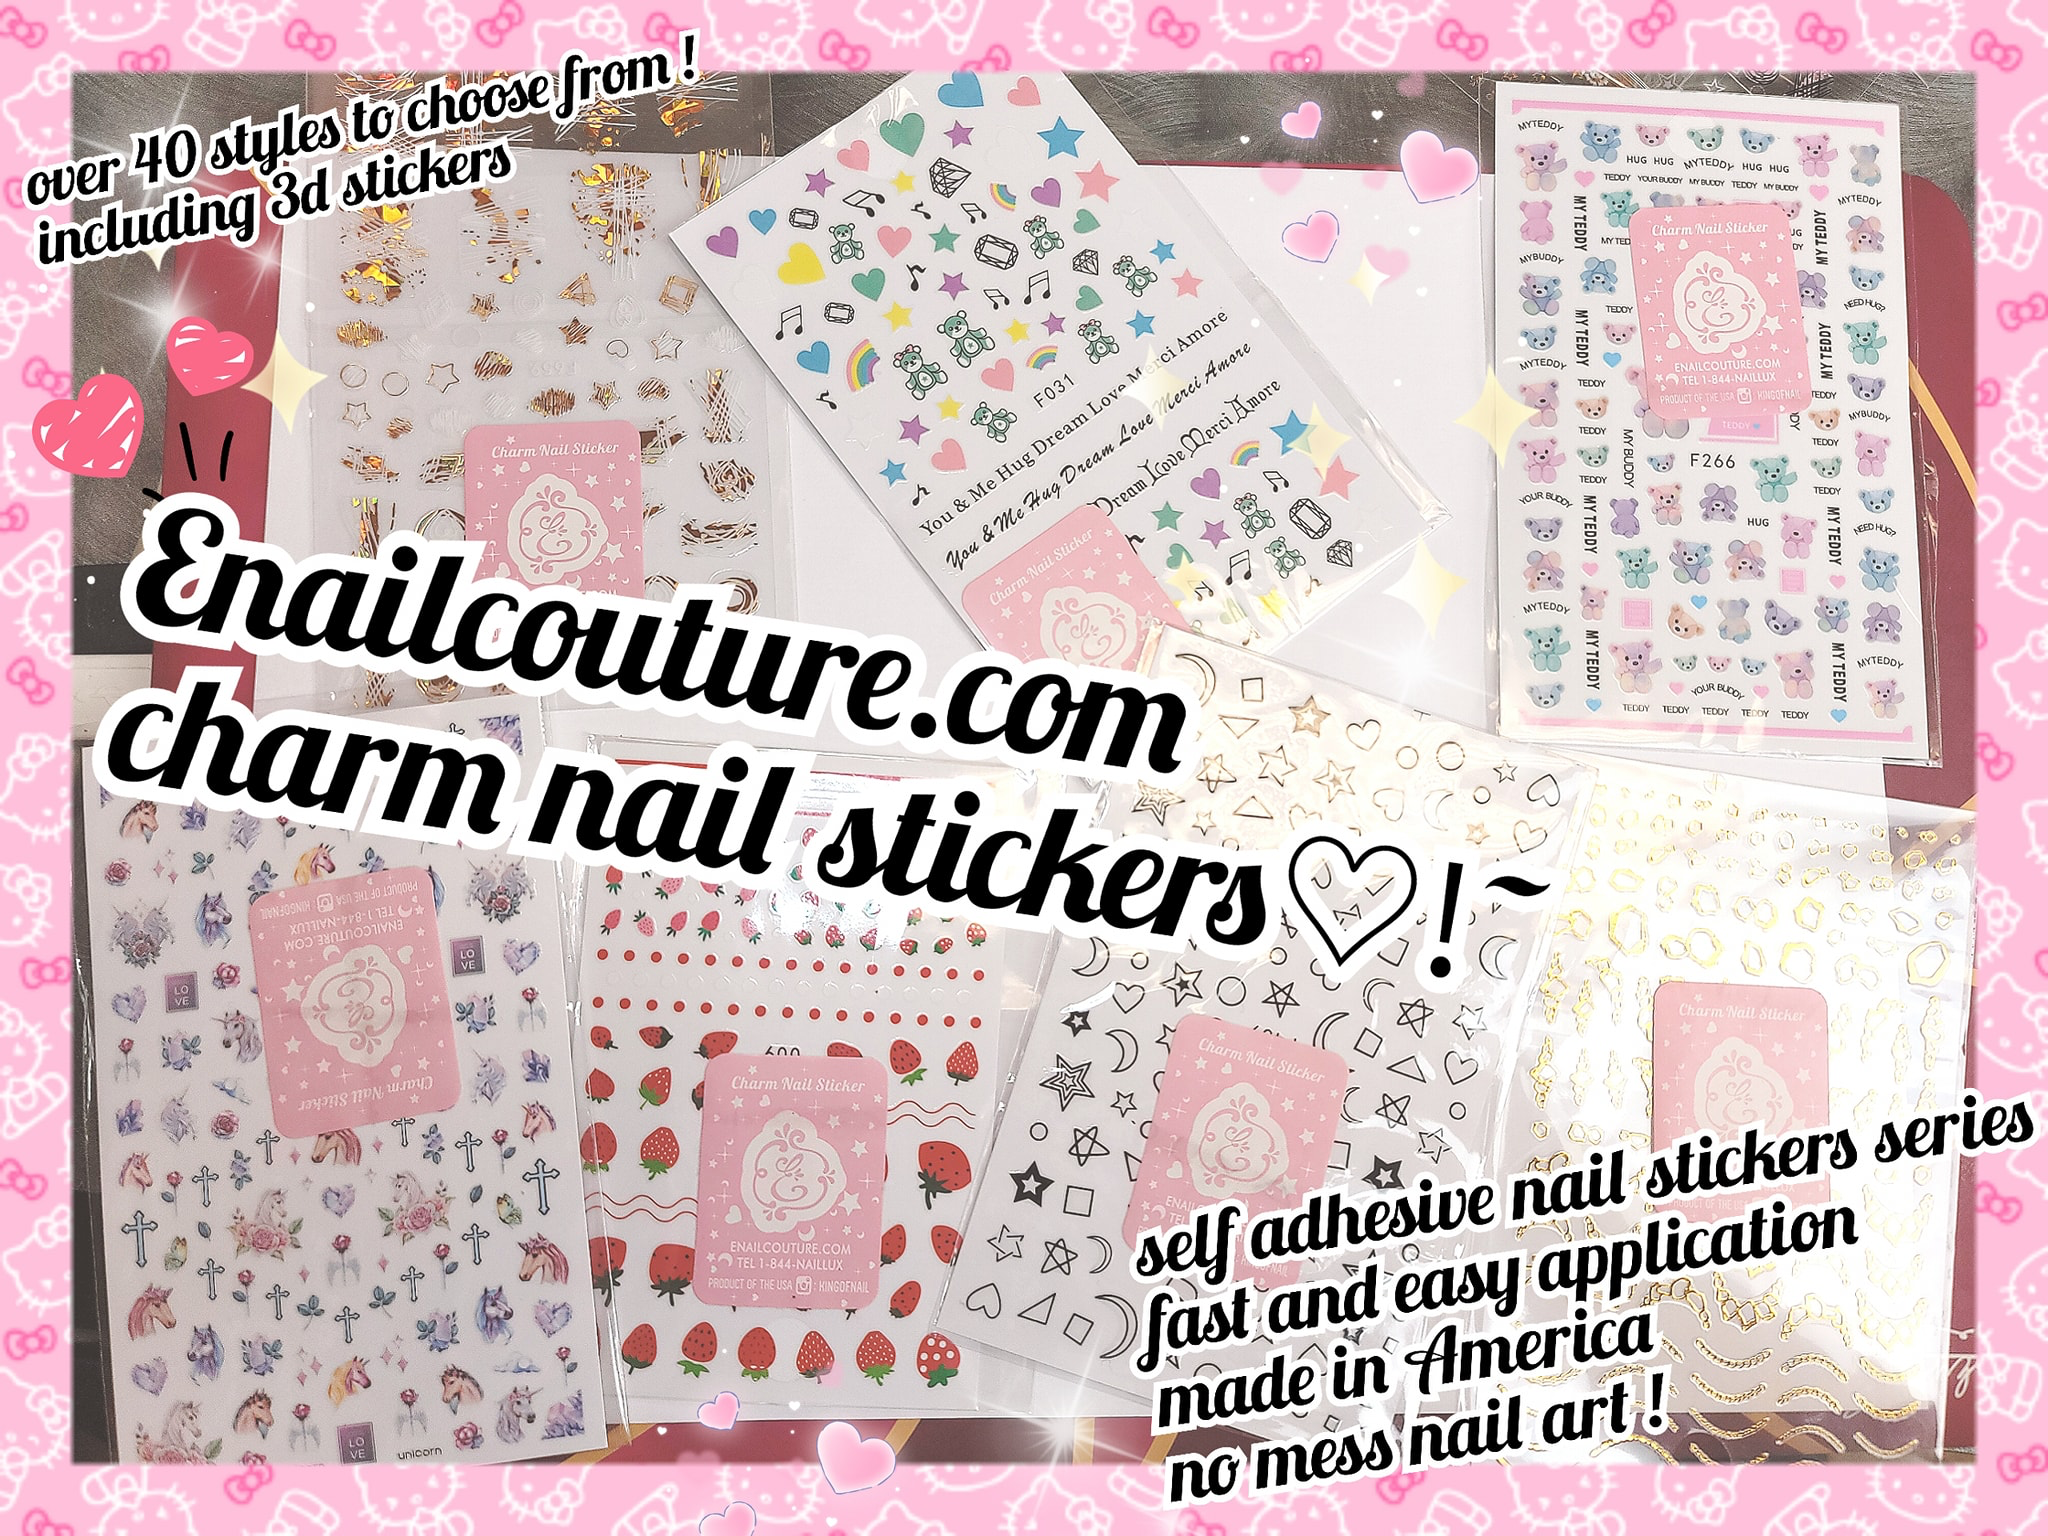 6 Sheets Valentine Rose LV Nail Stickers